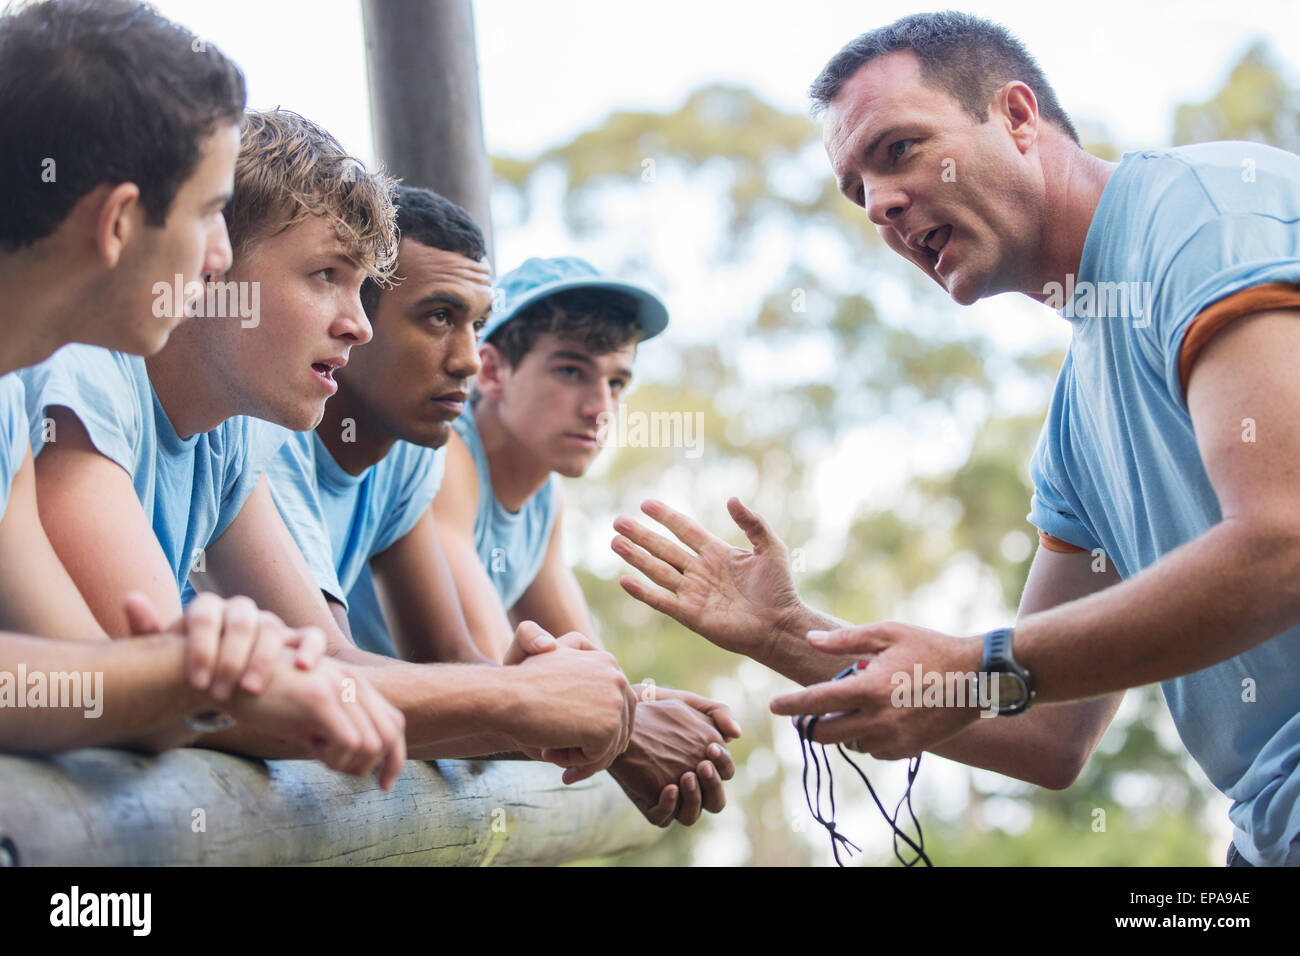 Team Leader-Bootcamp-Hindernis-Parcours Stockfoto